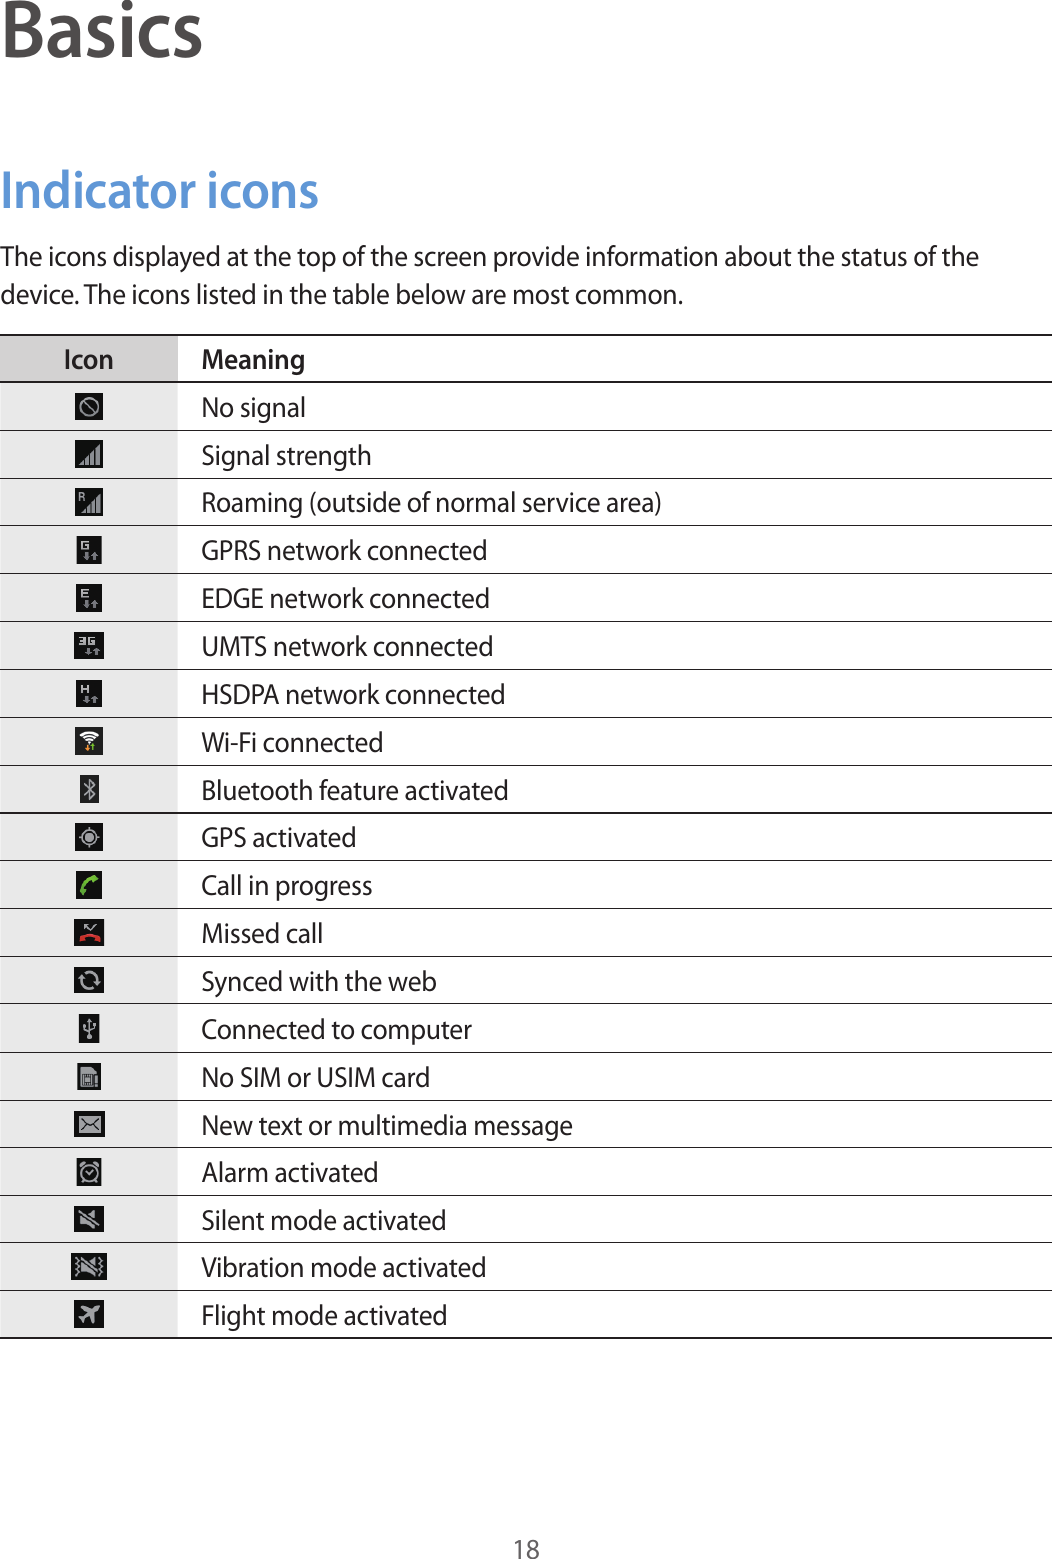 18BasicsIndicator iconsThe icons displayed at the top of the screen provide information about the status of the device. The icons listed in the table below are most common.Icon MeaningNo signalSignal strengthRoaming (outside of normal service area)GPRS network connectedEDGE network connectedUMTS network connectedHSDPA network connectedWi-Fi connectedBluetooth feature activatedGPS activatedCall in progressMissed callSynced with the webConnected to computerNo SIM or USIM cardNew text or multimedia messageAlarm activatedSilent mode activatedVibration mode activatedFlight mode activated